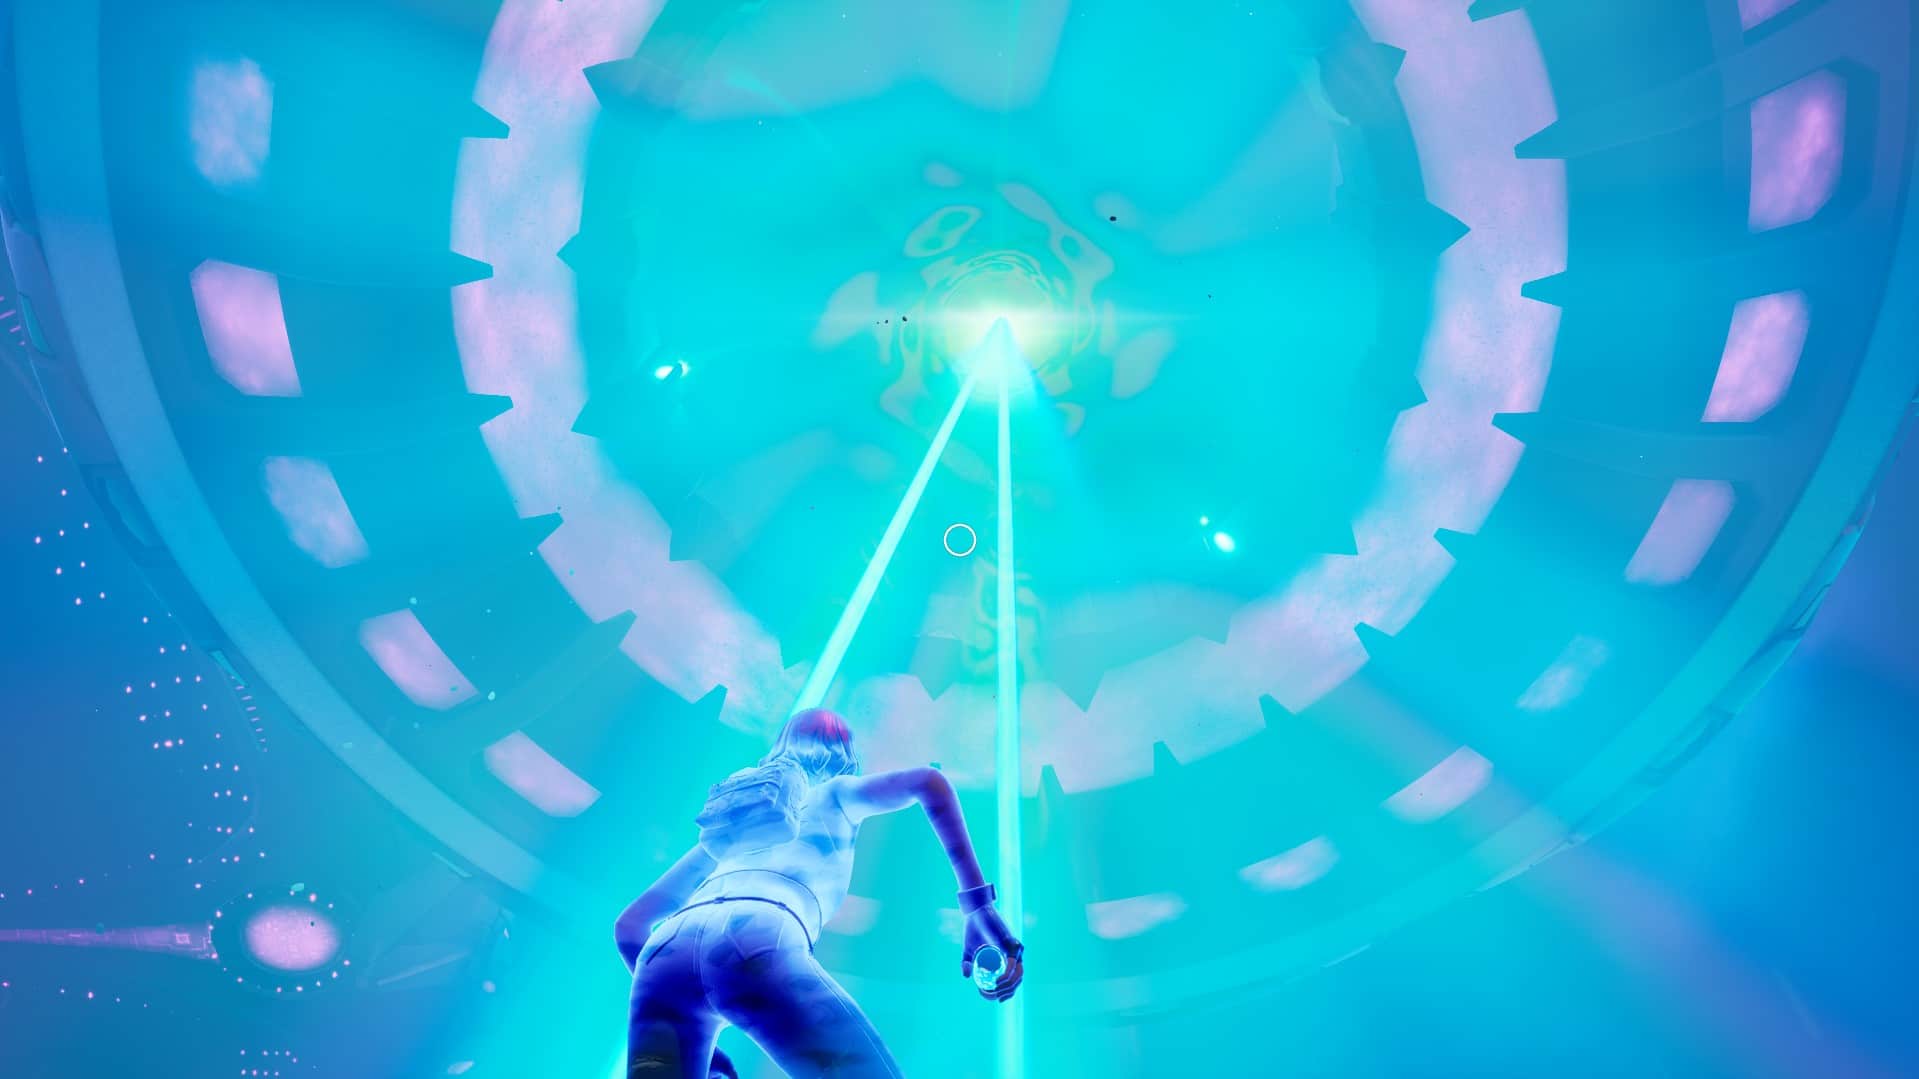 Fortnite 17.10 update patch notes: Abducters, alien parasites and secret styles